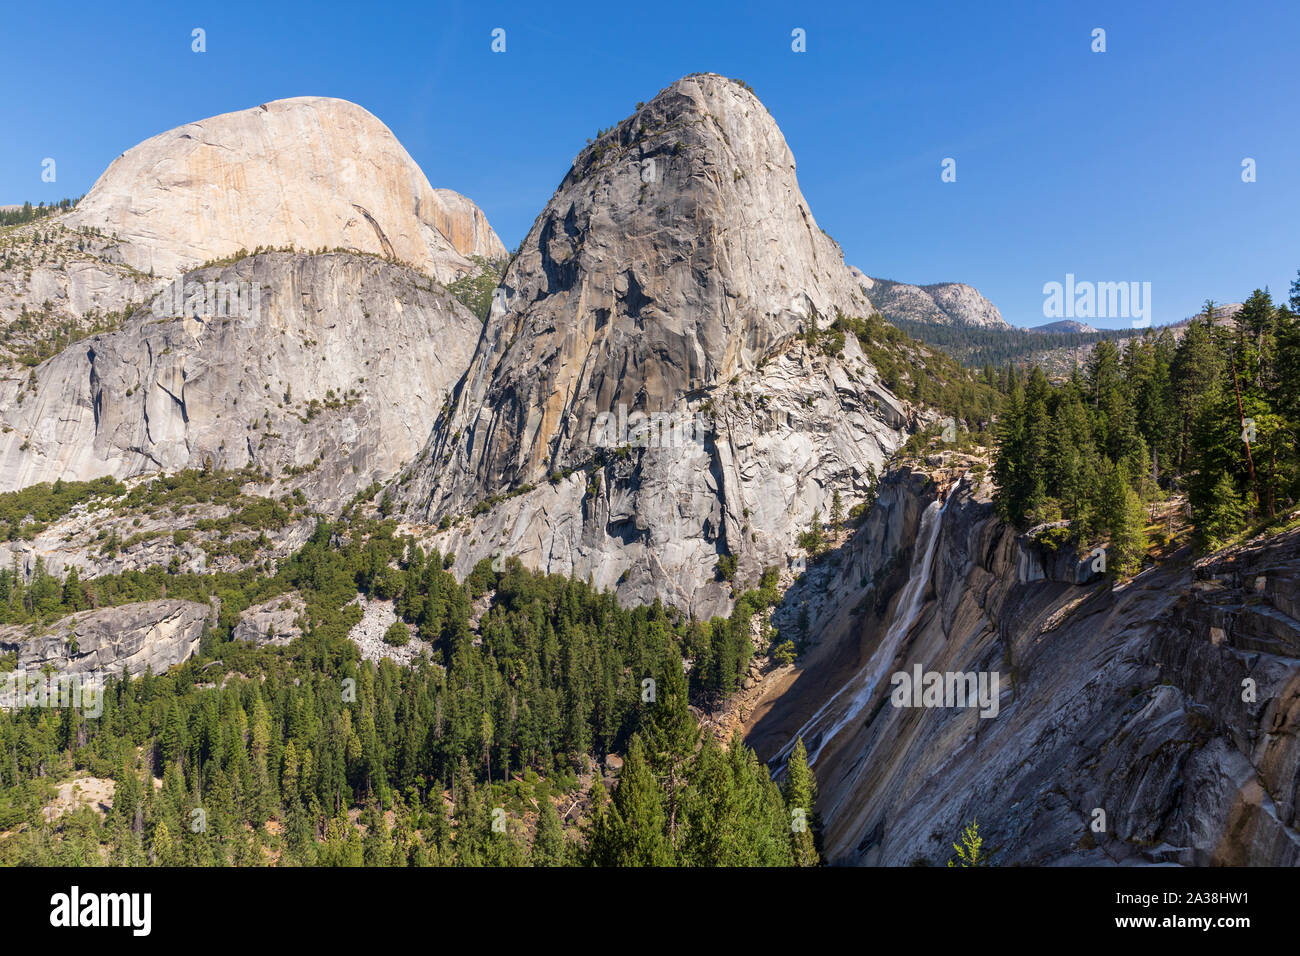 Daytime view of Half Dome, Liberty Cap and Nevada Falls in Yosemite National Park, Californa on a sunny September day in 2019. Stock Photo